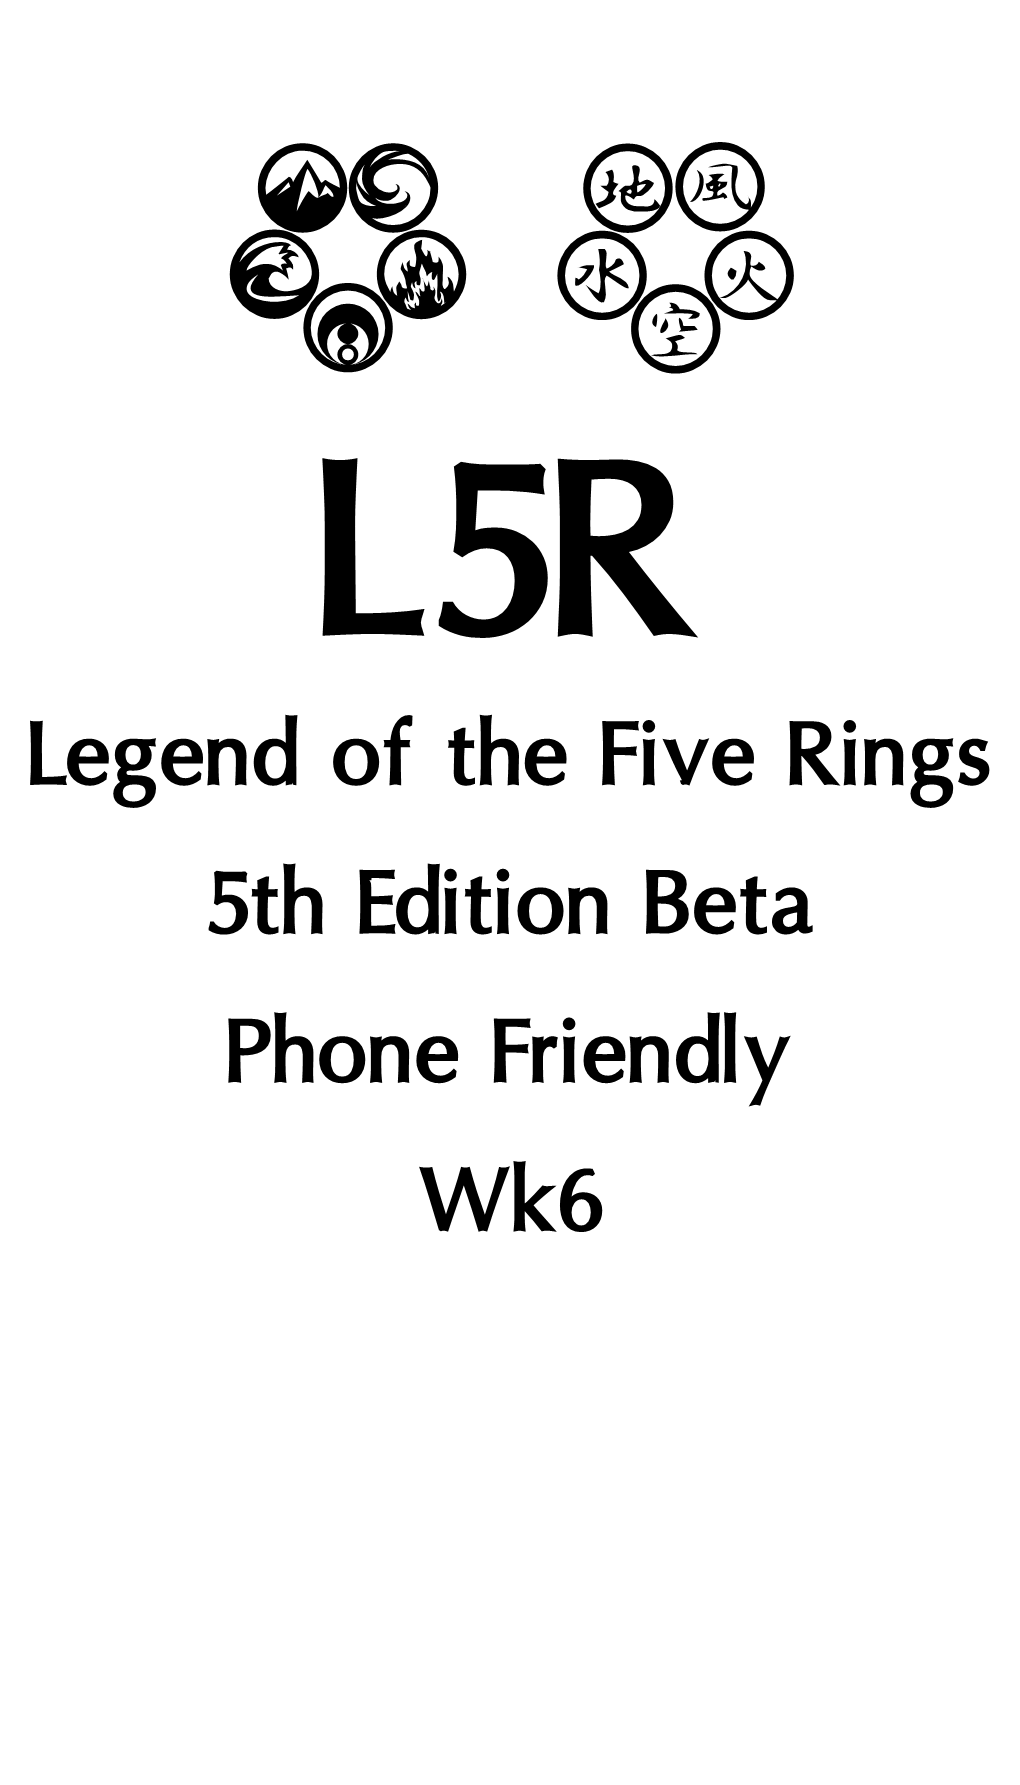 Legend of the Five Rings 5Th Edition Beta Phone Friendly Wk6 TOC  Legend of the Five Rings  Core 2 / 42 Table of Contents Ring Descriptions